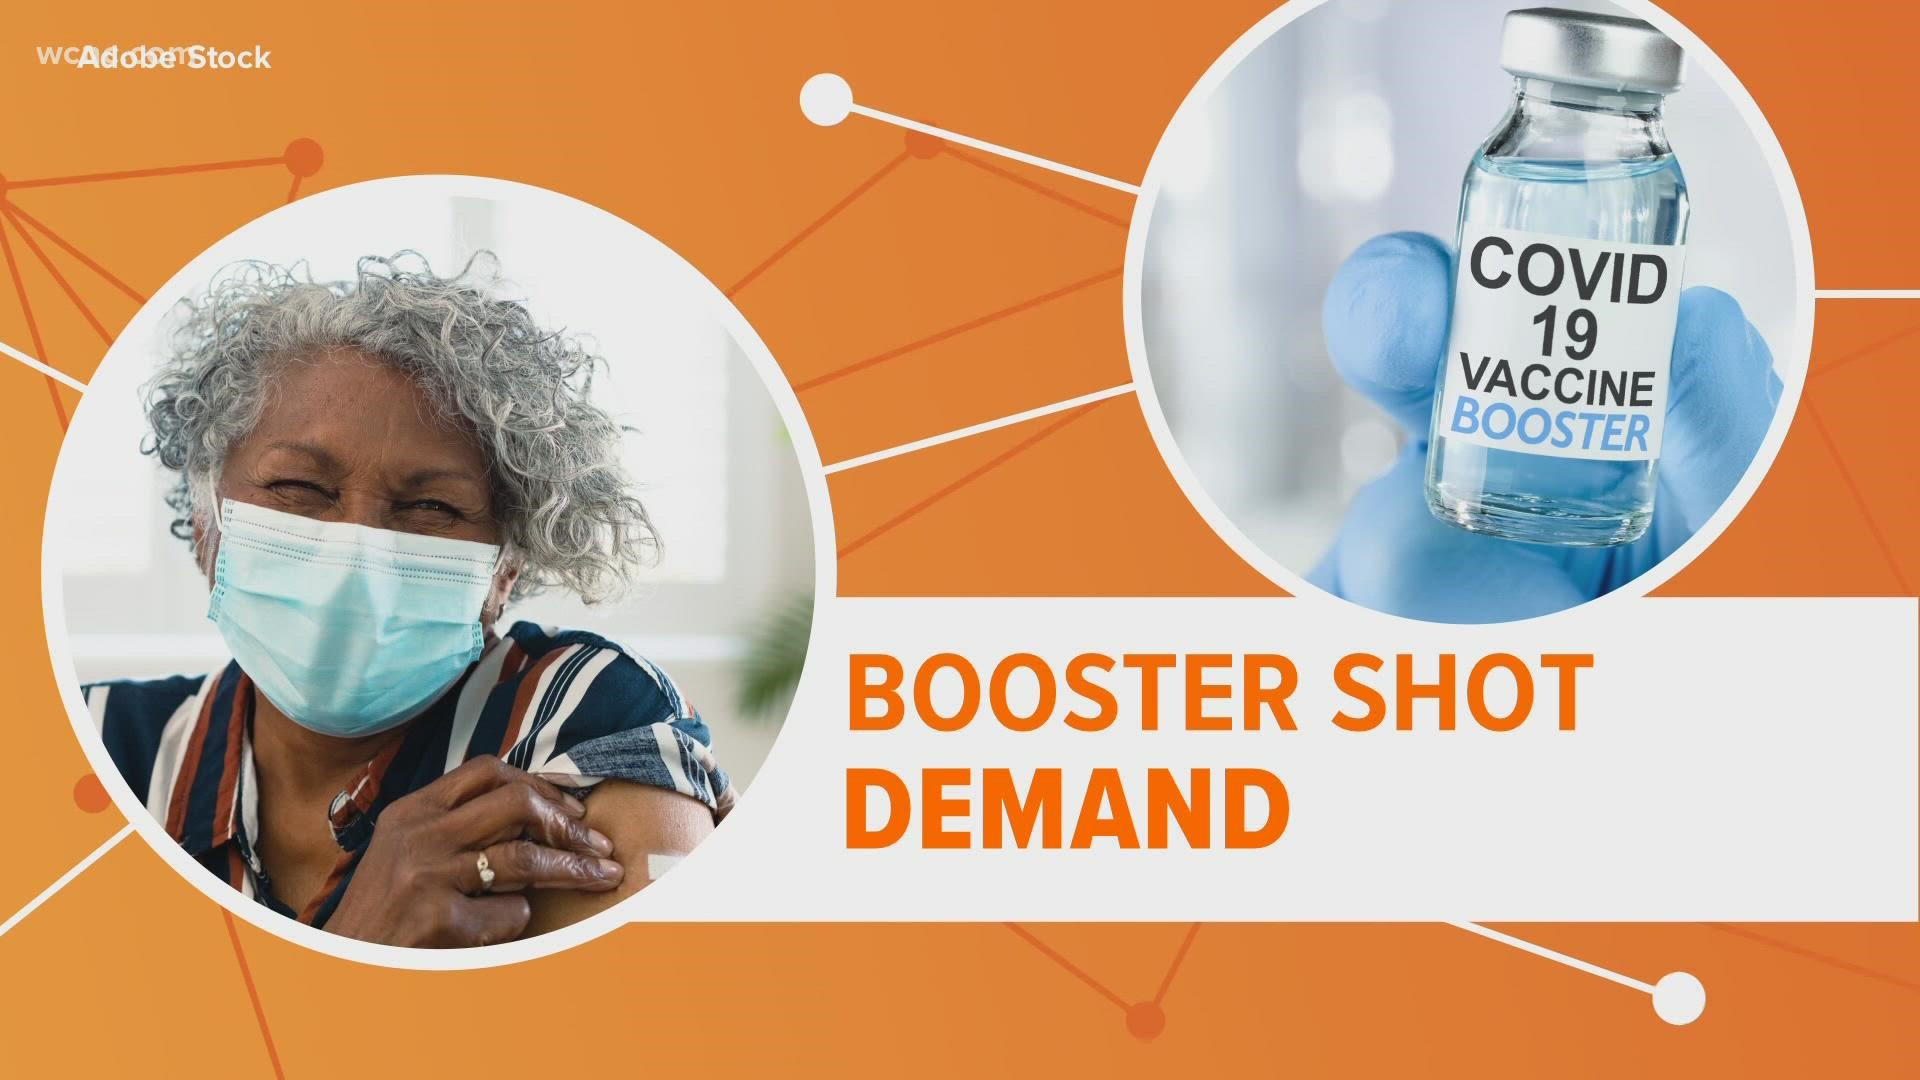 Pfizer is pushing to make COVID-19 booster shots available for all people, but those who are eligible haven't been rushing to get their third dose of the vaccine.